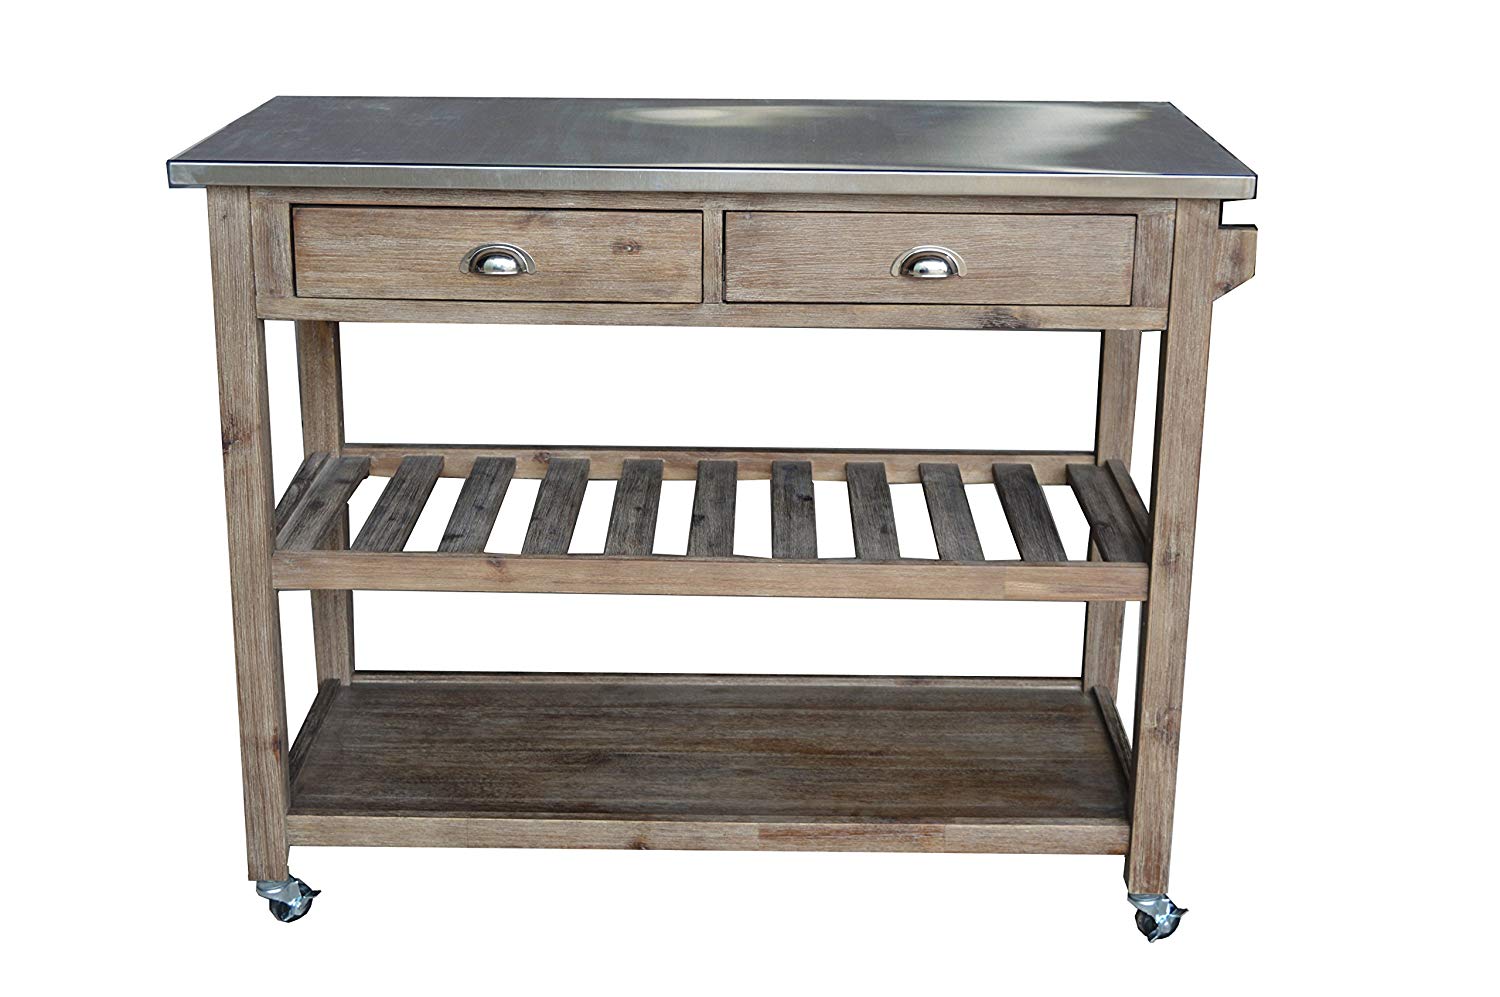 stainless steel kitchen cart with breakfast bar